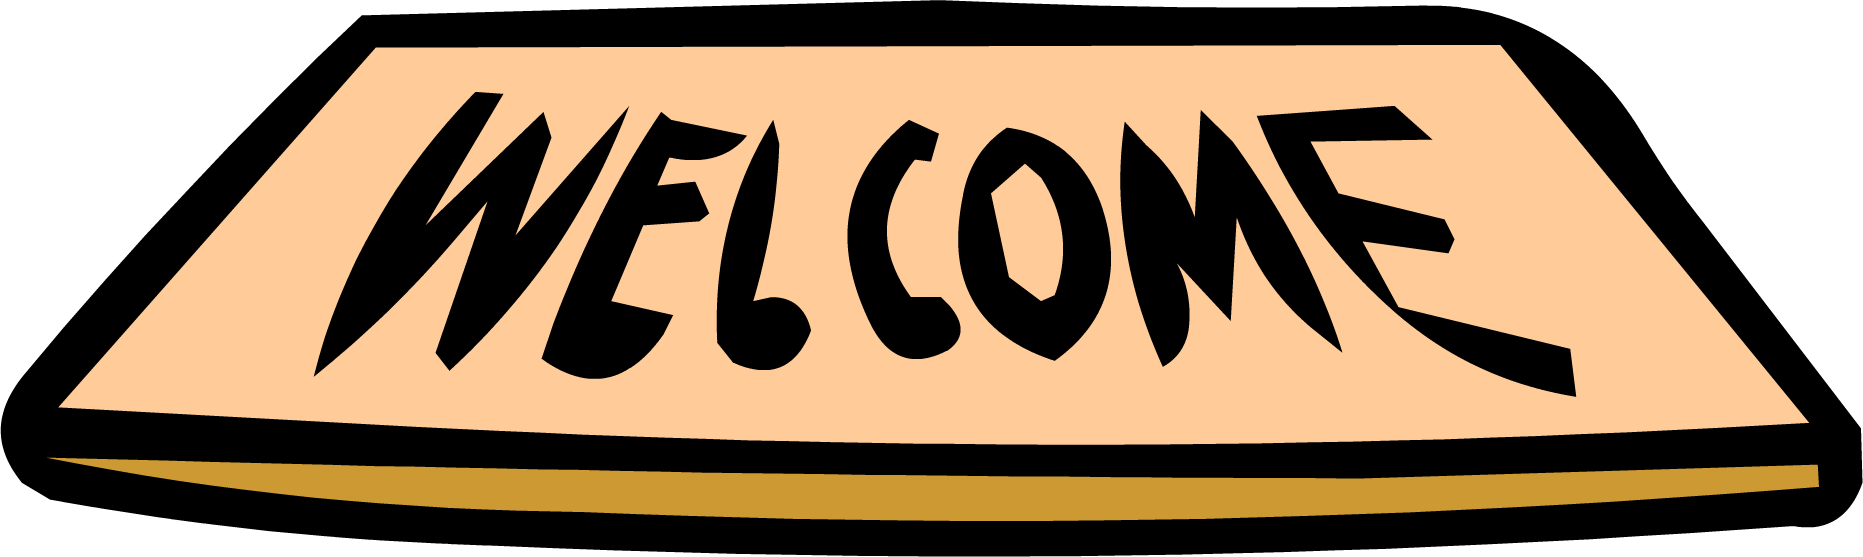 Welcome Mat PNG - 61209